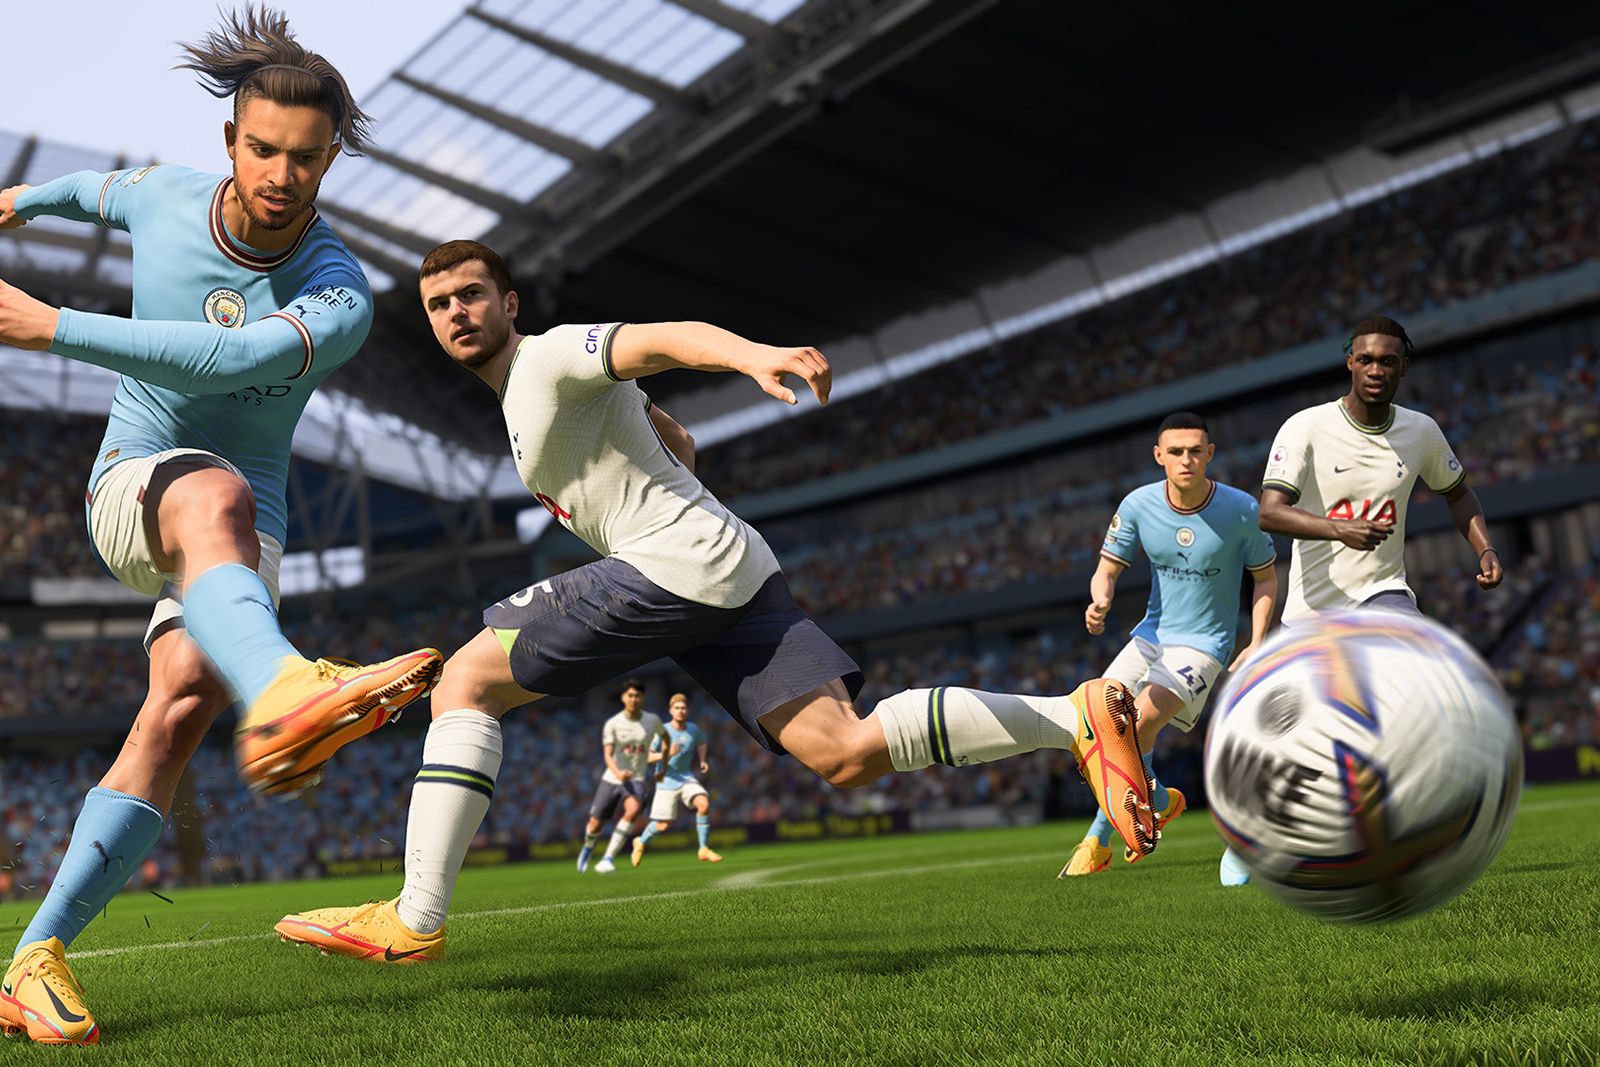 How to play FIFA 23 early: How to get early access photo 2